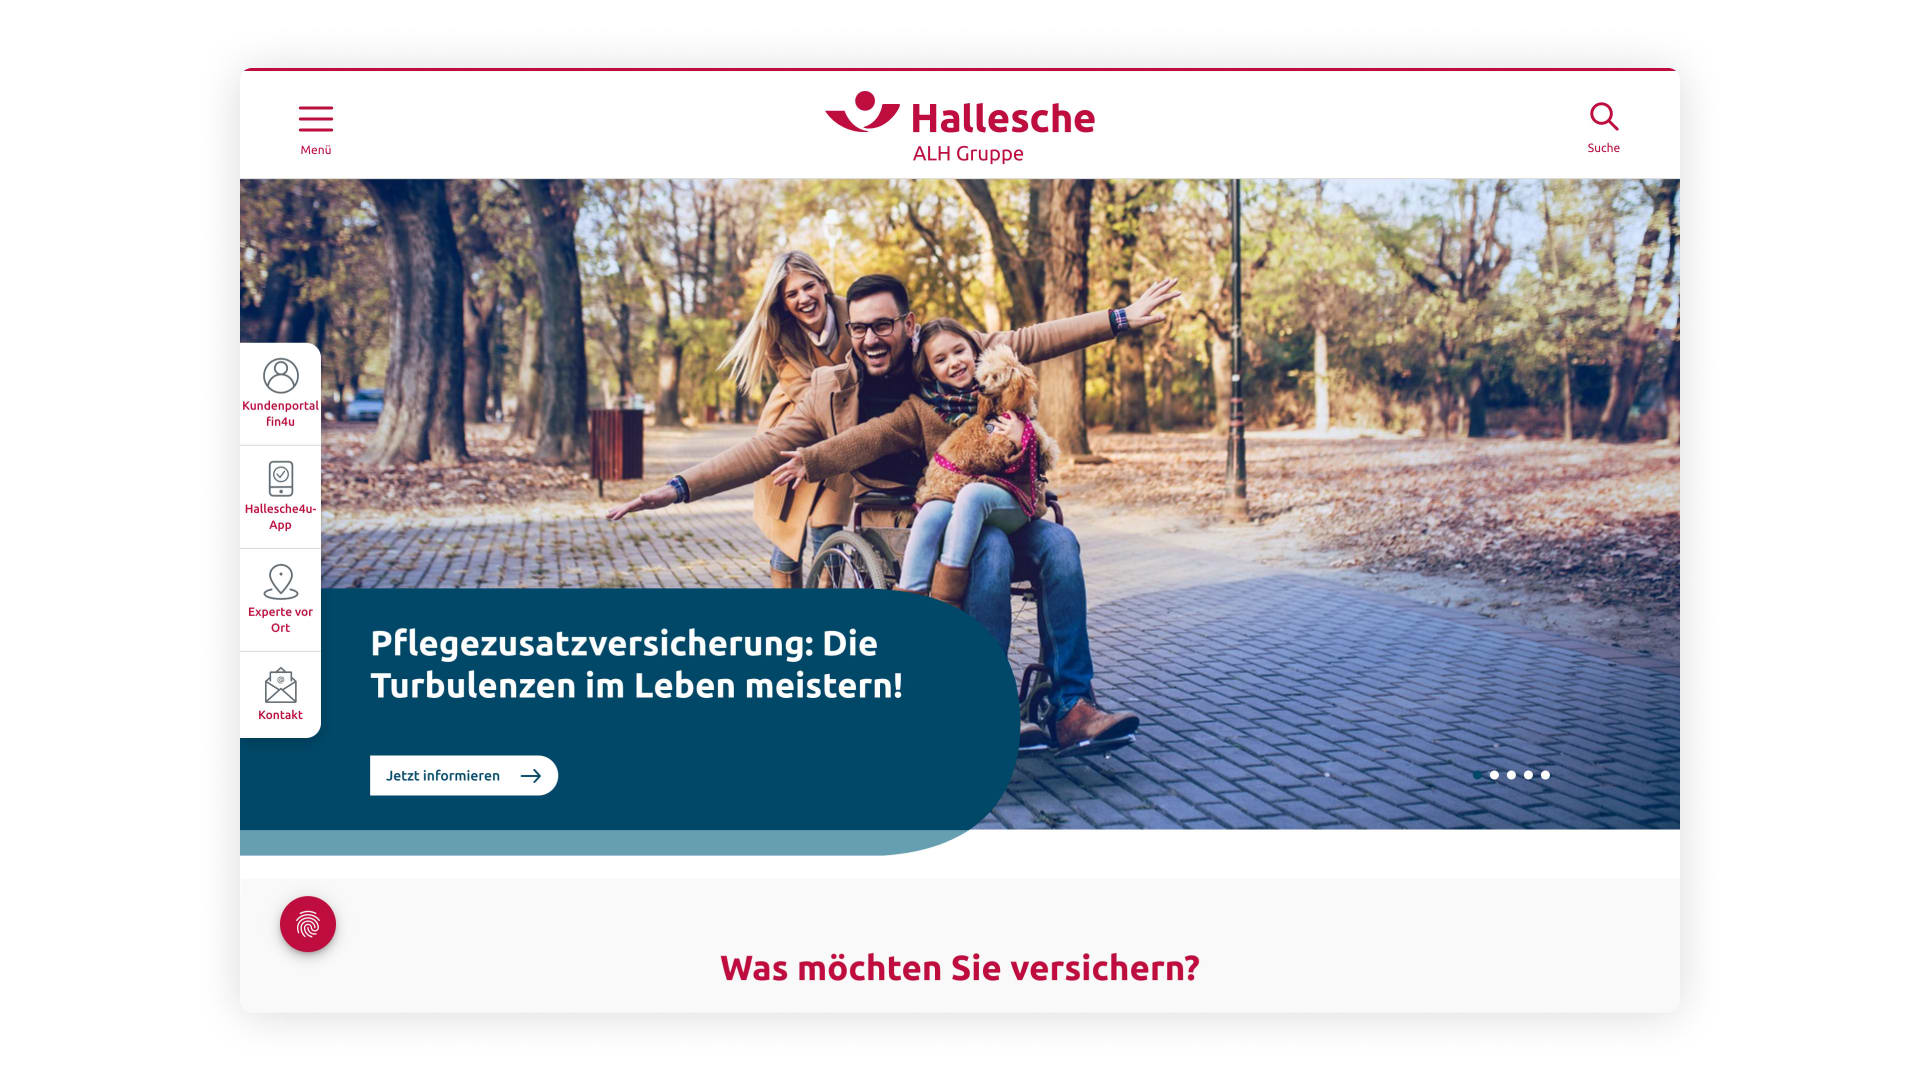 The picture shows part of the Hallesche ALH Group website. The section advertises the supplementary long-term care insurance with a wheelchair user and his family.